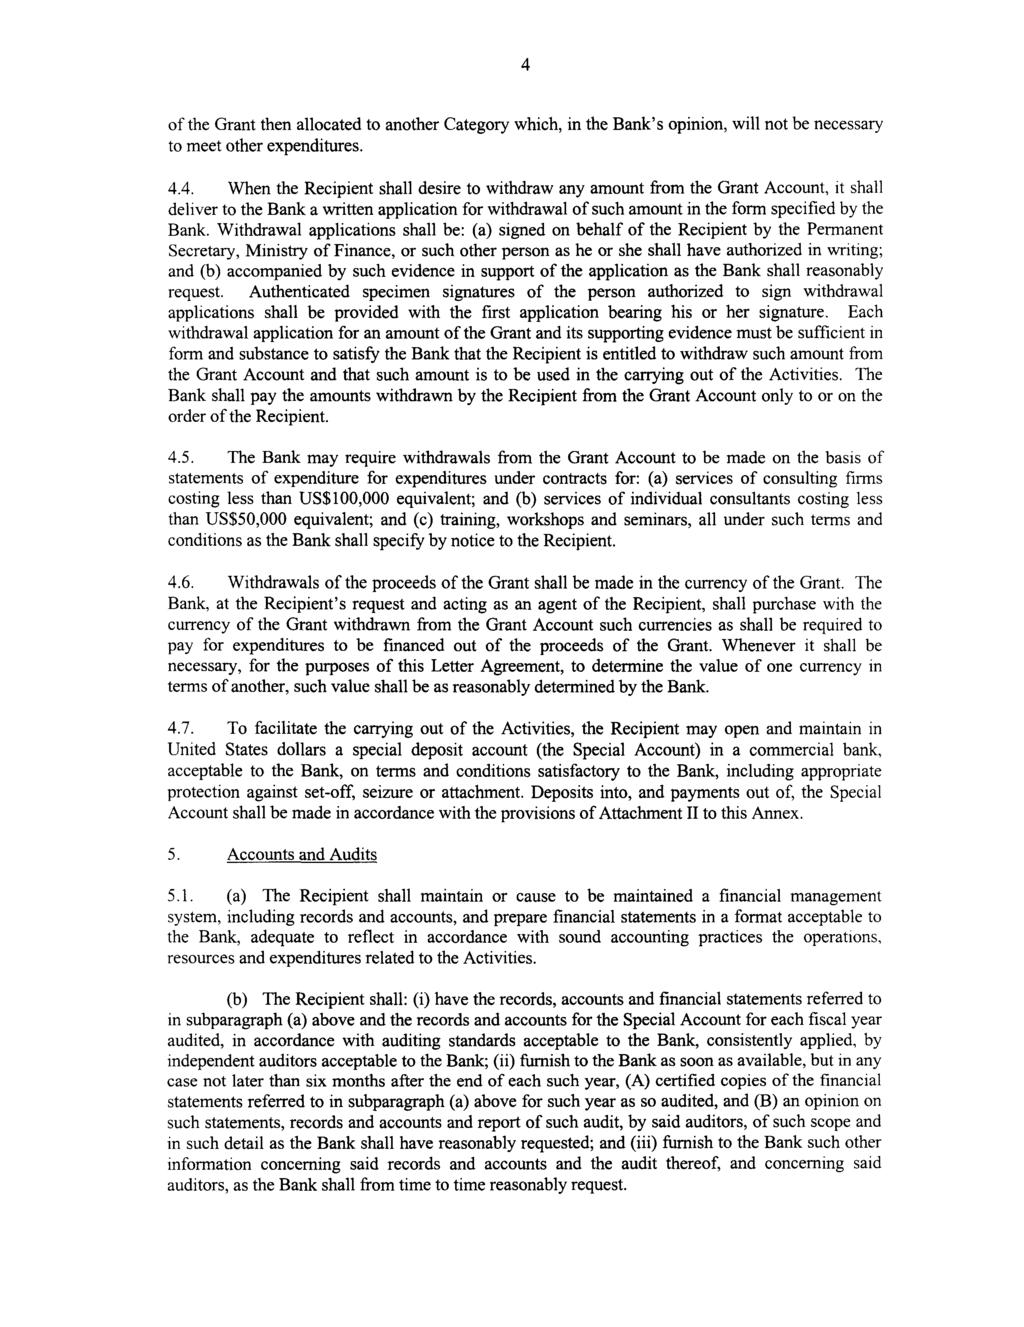 4 of the Grant then allocated to another Category which, in the Bank's opinion, will not be necessary to meet other expenditures. 4.4. When the Recipient shall desire to withdraw any amount from the Grant Account, it shall deliver to the Bank a written application for withdrawal of such amount in the form specified by the Bank.